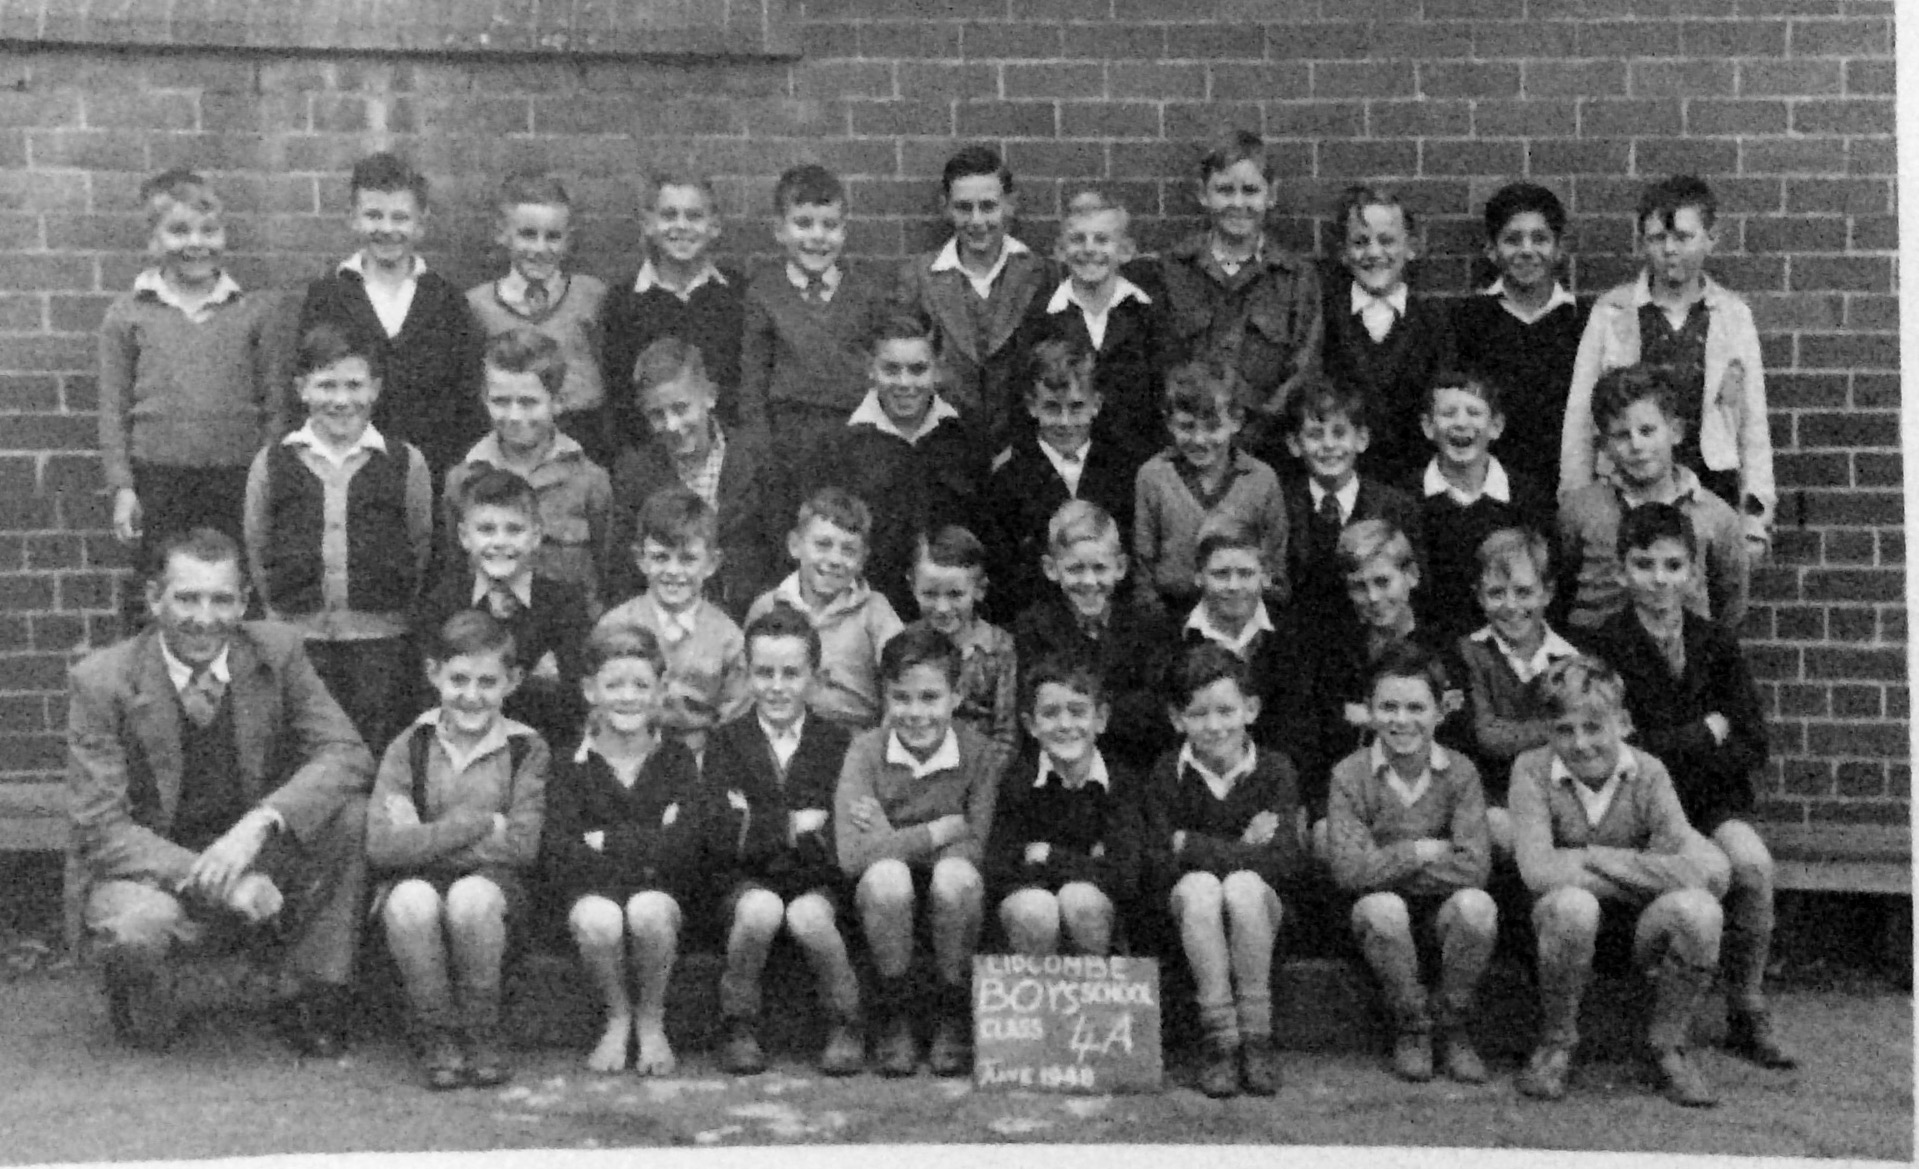 Top row second from the left is Cecil John Fisher, aged 10years. Born 16/08/1938